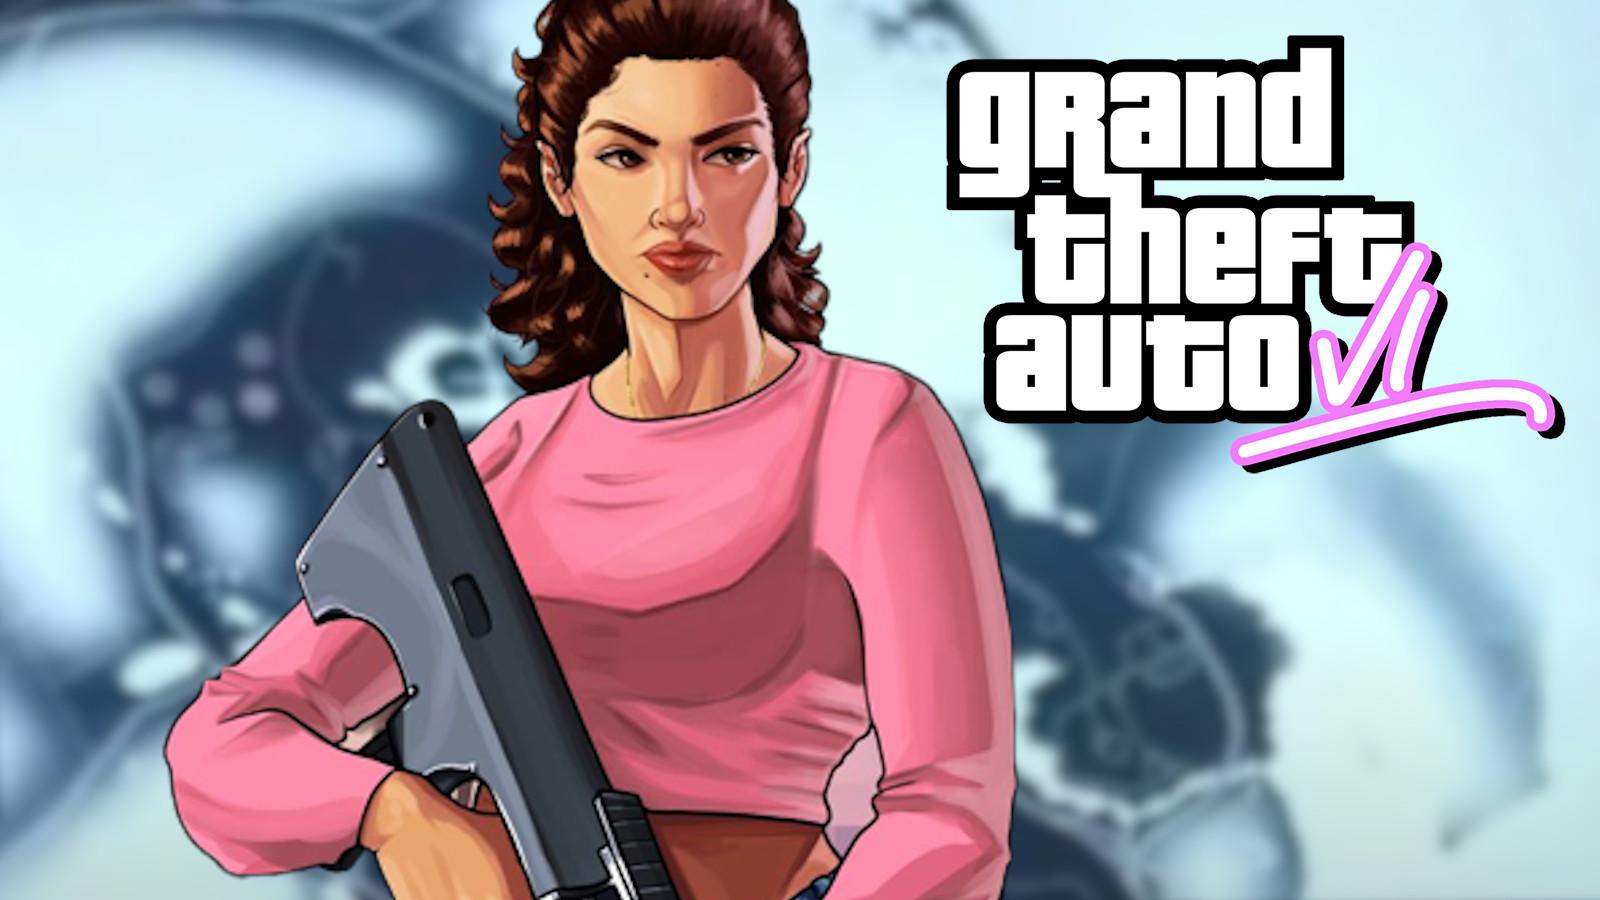 Discovered  A New Alleged GTA 6 Map Leak Reveals How Massive Vice City  Could be